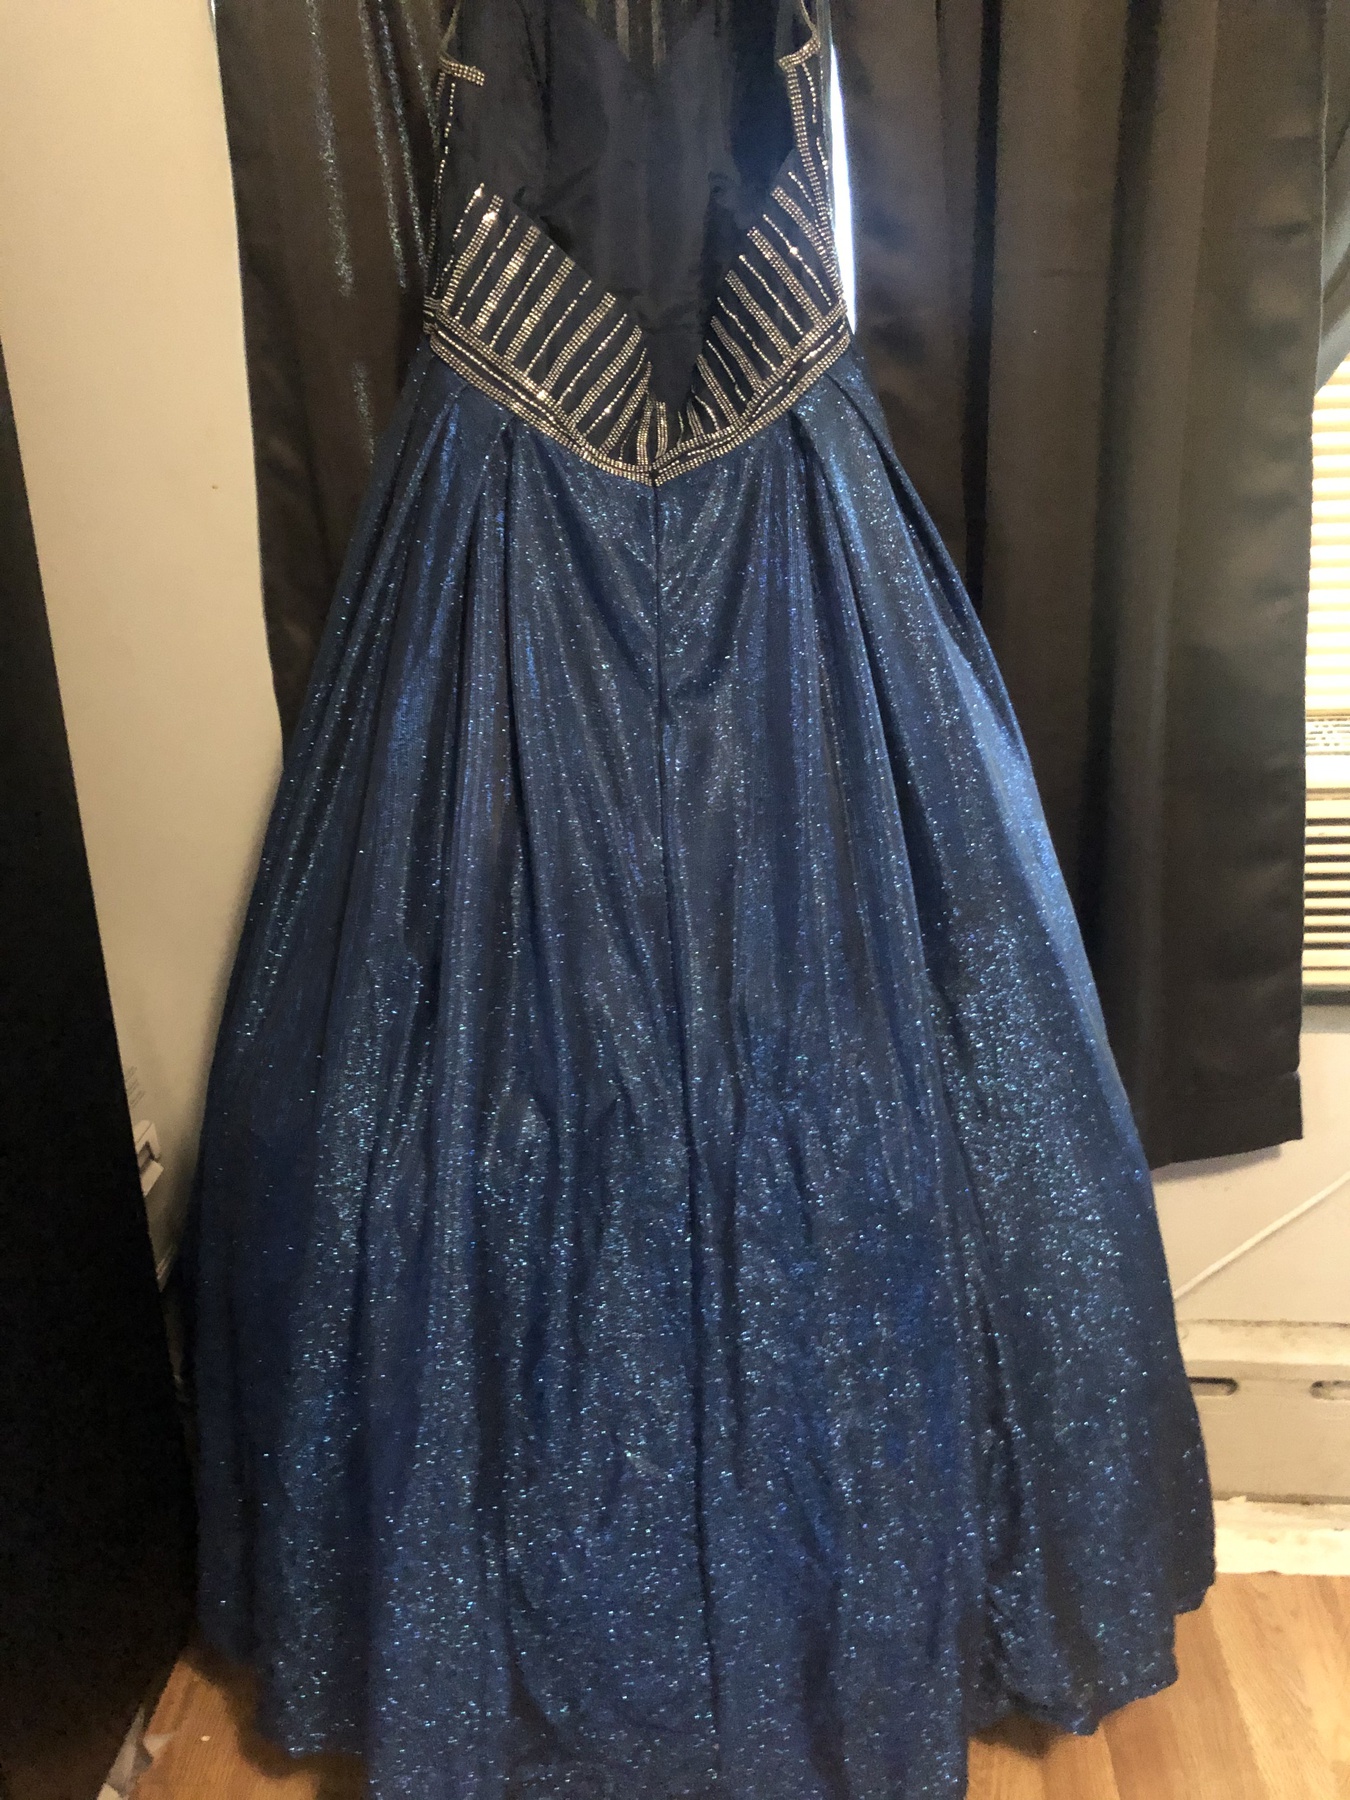 Blue Size 20 Ball gown on Queenly